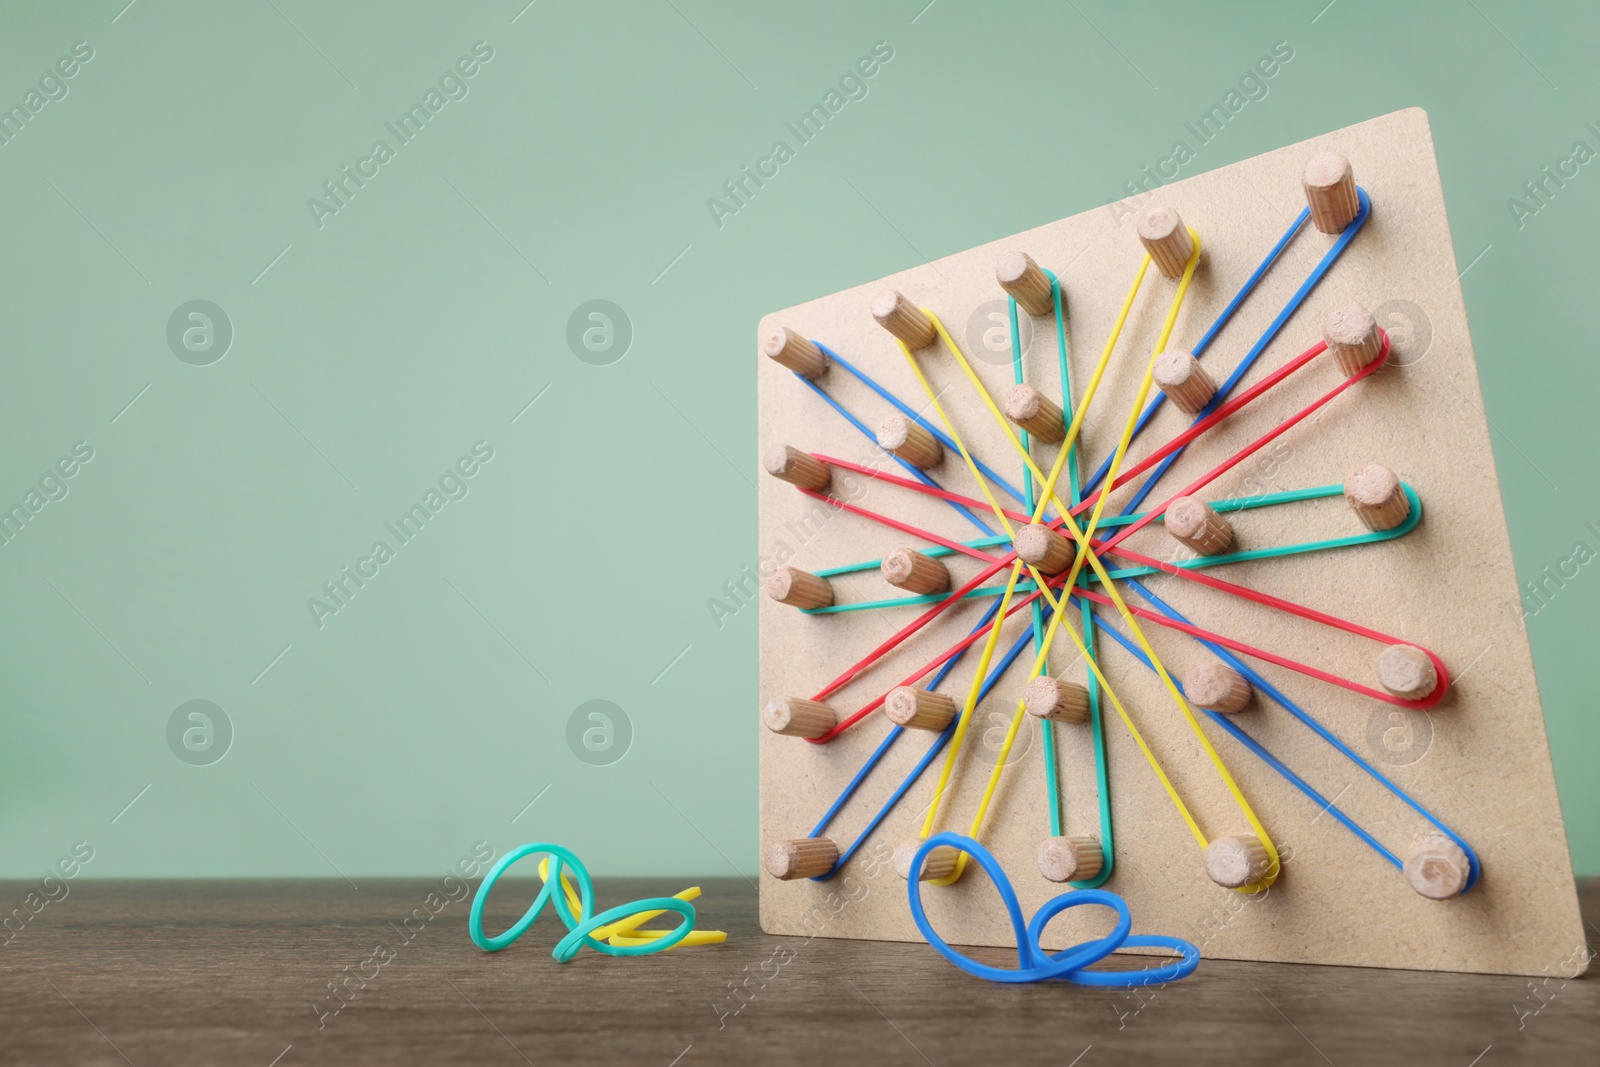 Photo of Wooden geoboard and rubber bands on table against grey wall, low angle view with space for text. Motor skills development